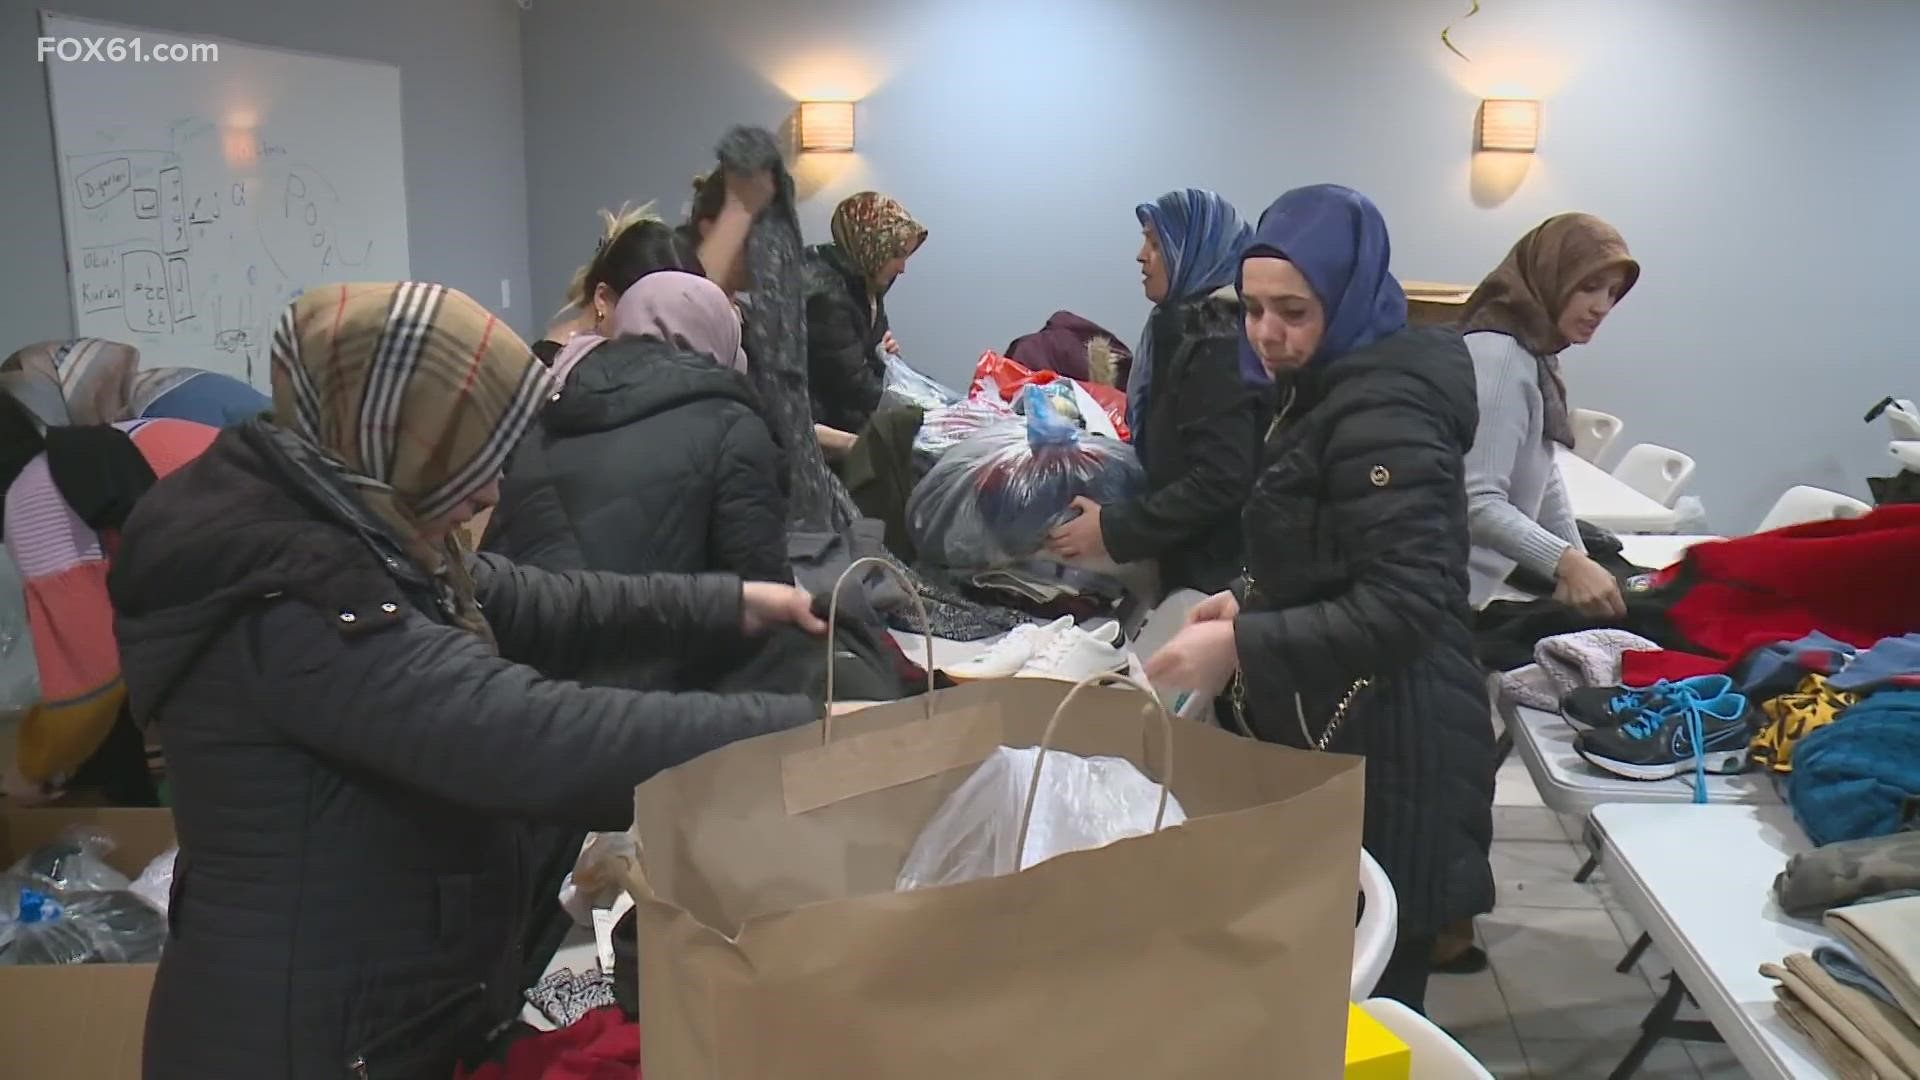 A Turkish mosque has been sorting through donations from the area to send to the Turkish consulate in Boston that transports them to Turkey.